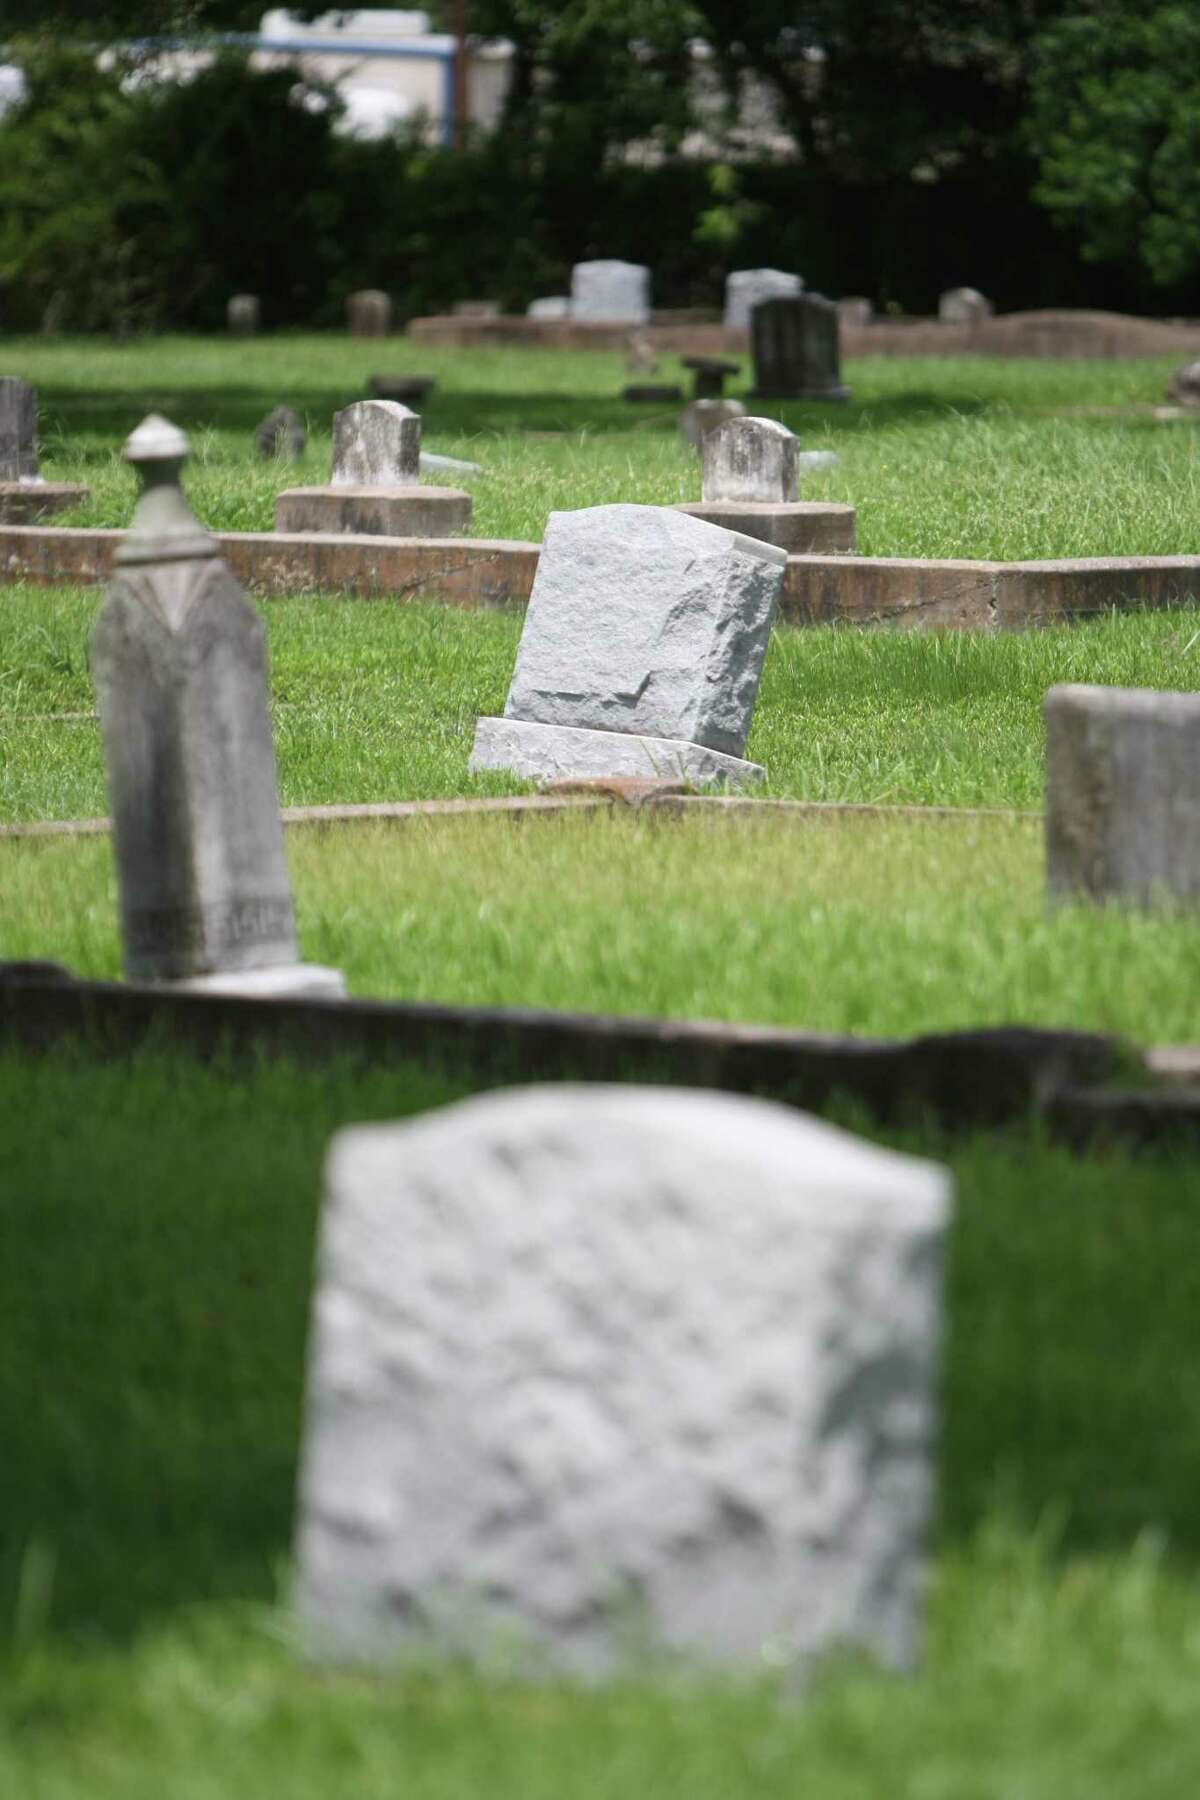 Humble Cemetery, located on S. Houston and Isaacks Rd., is believed to be the town's oldest cemetery dating back to 1867. It's designated as a Texas Historical Marker in the Humble/Kingwood area. Photo by Thomas Nguyen/For the Chronicle.